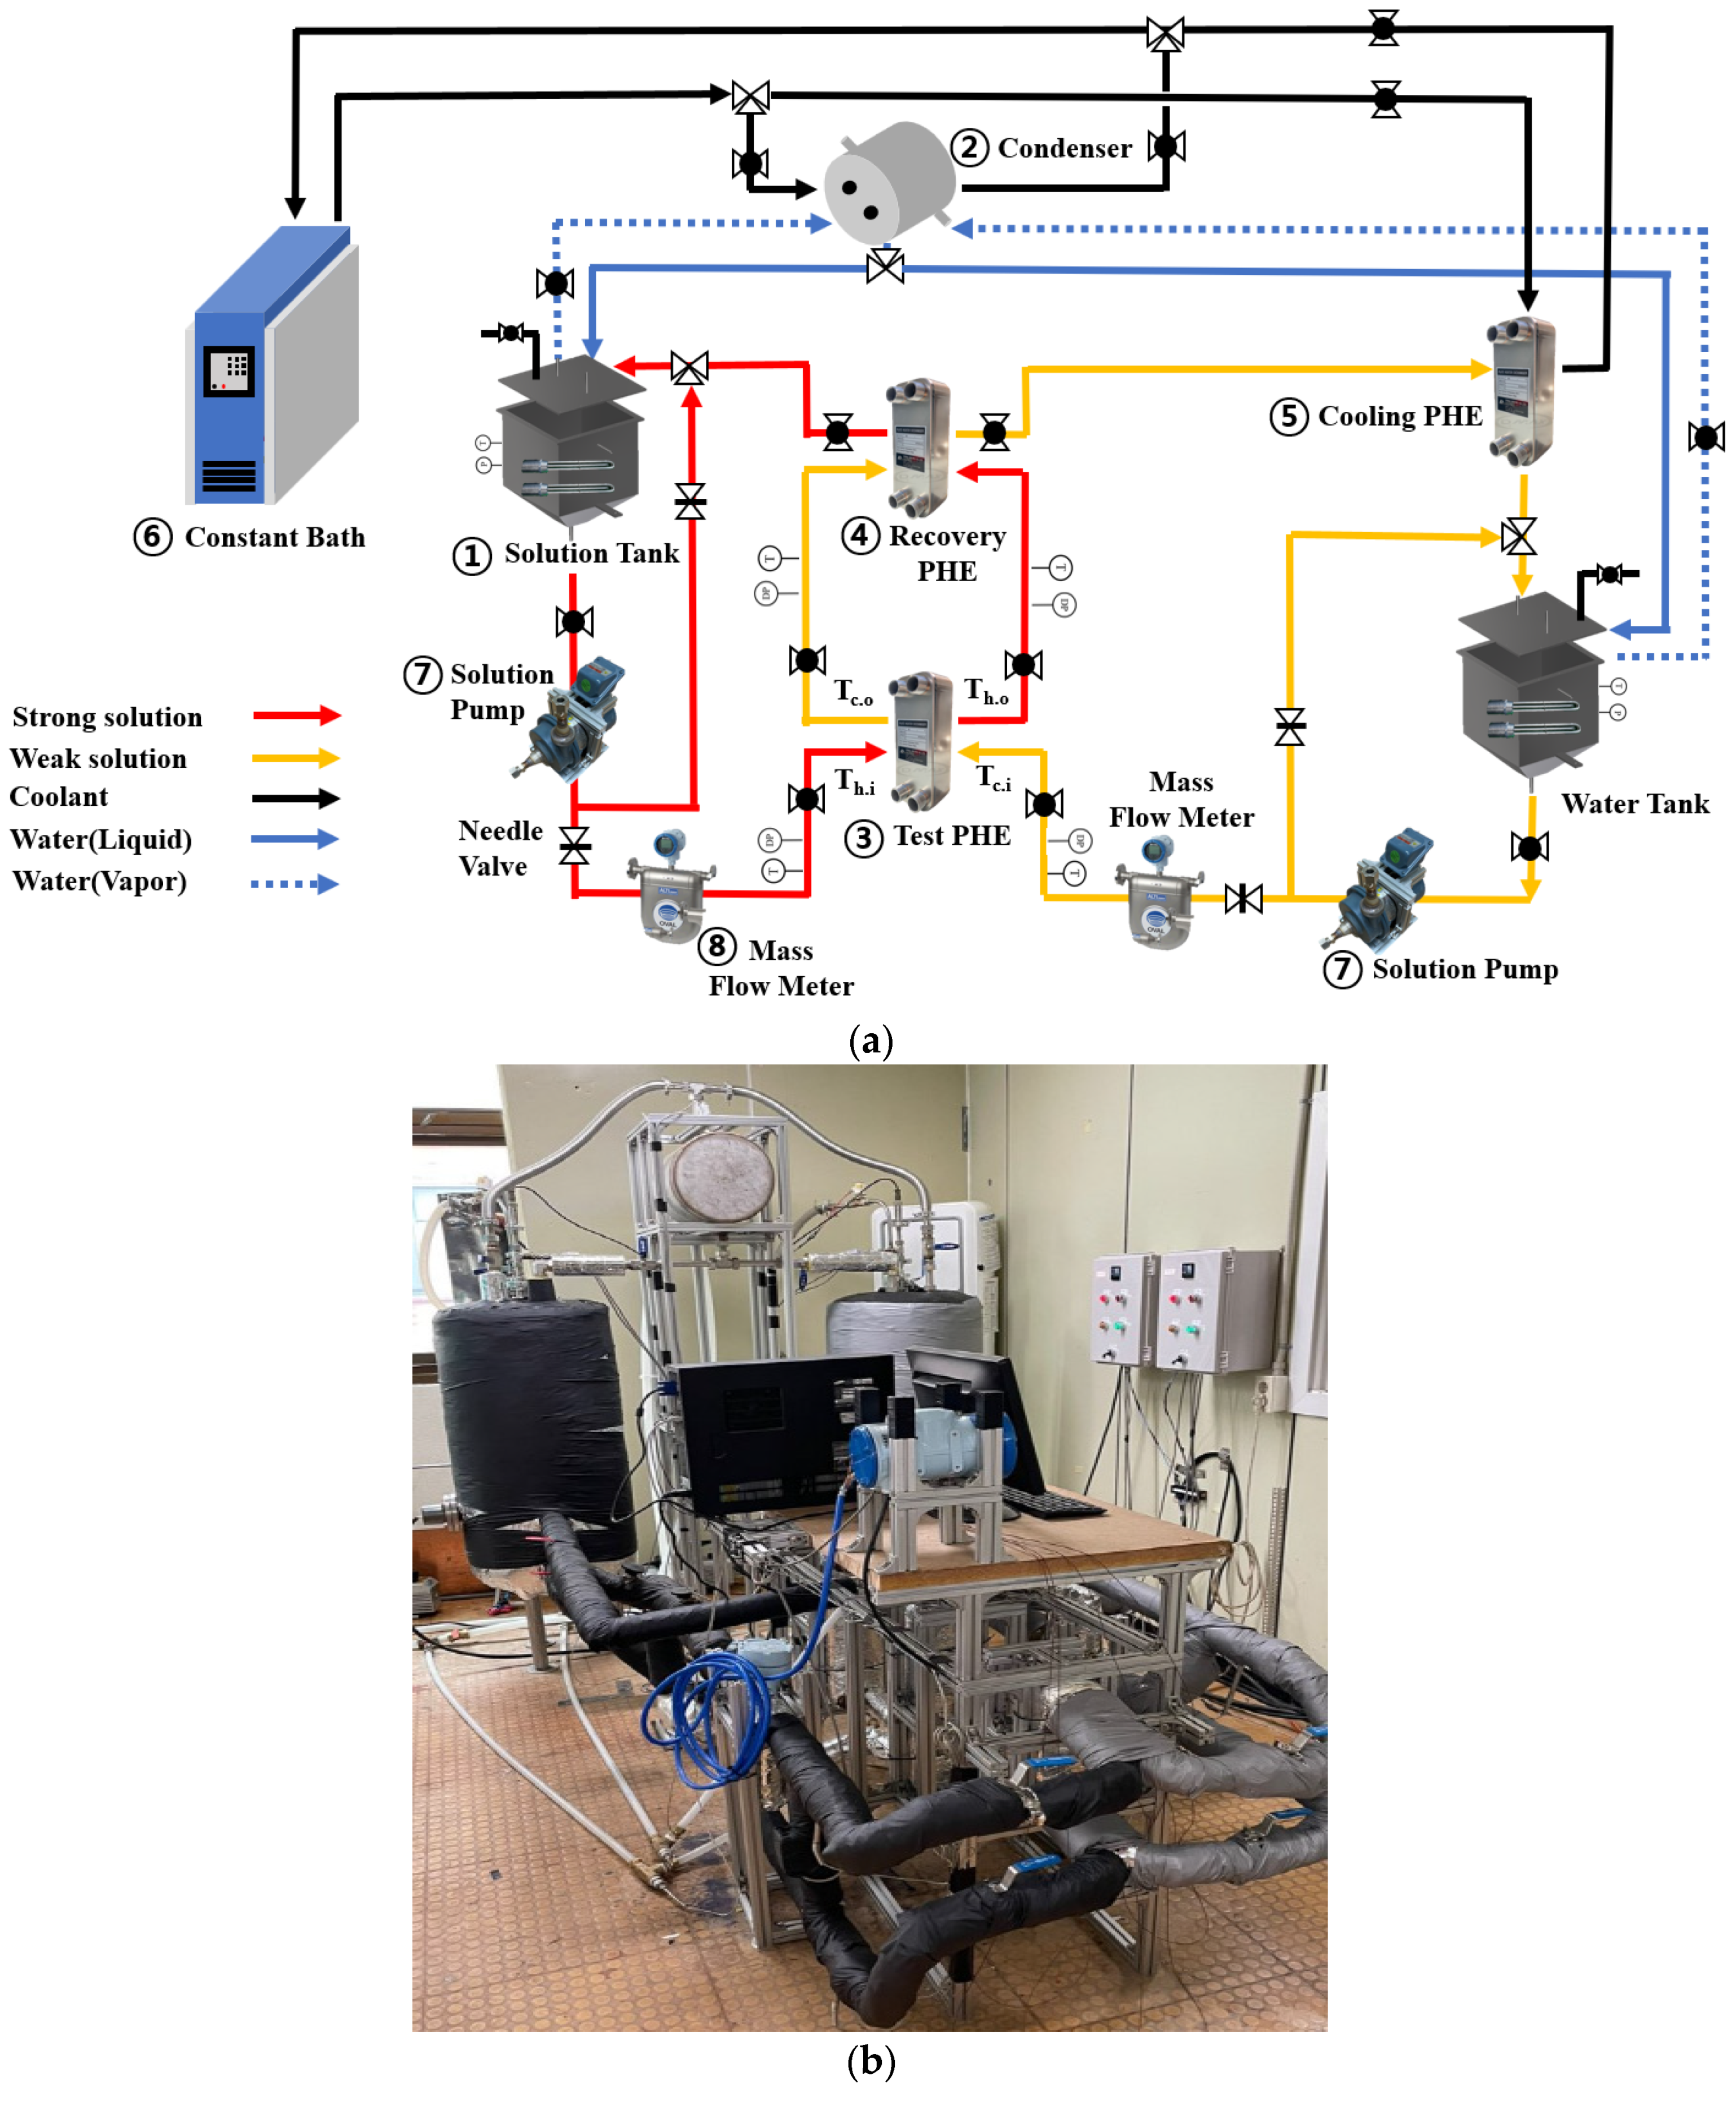 Energies | Free Full-Text | Experimental Investigation of the Heat Transfer  Characteristics of Plate Heat Exchangers Using LiBr/Water as Working Fluid